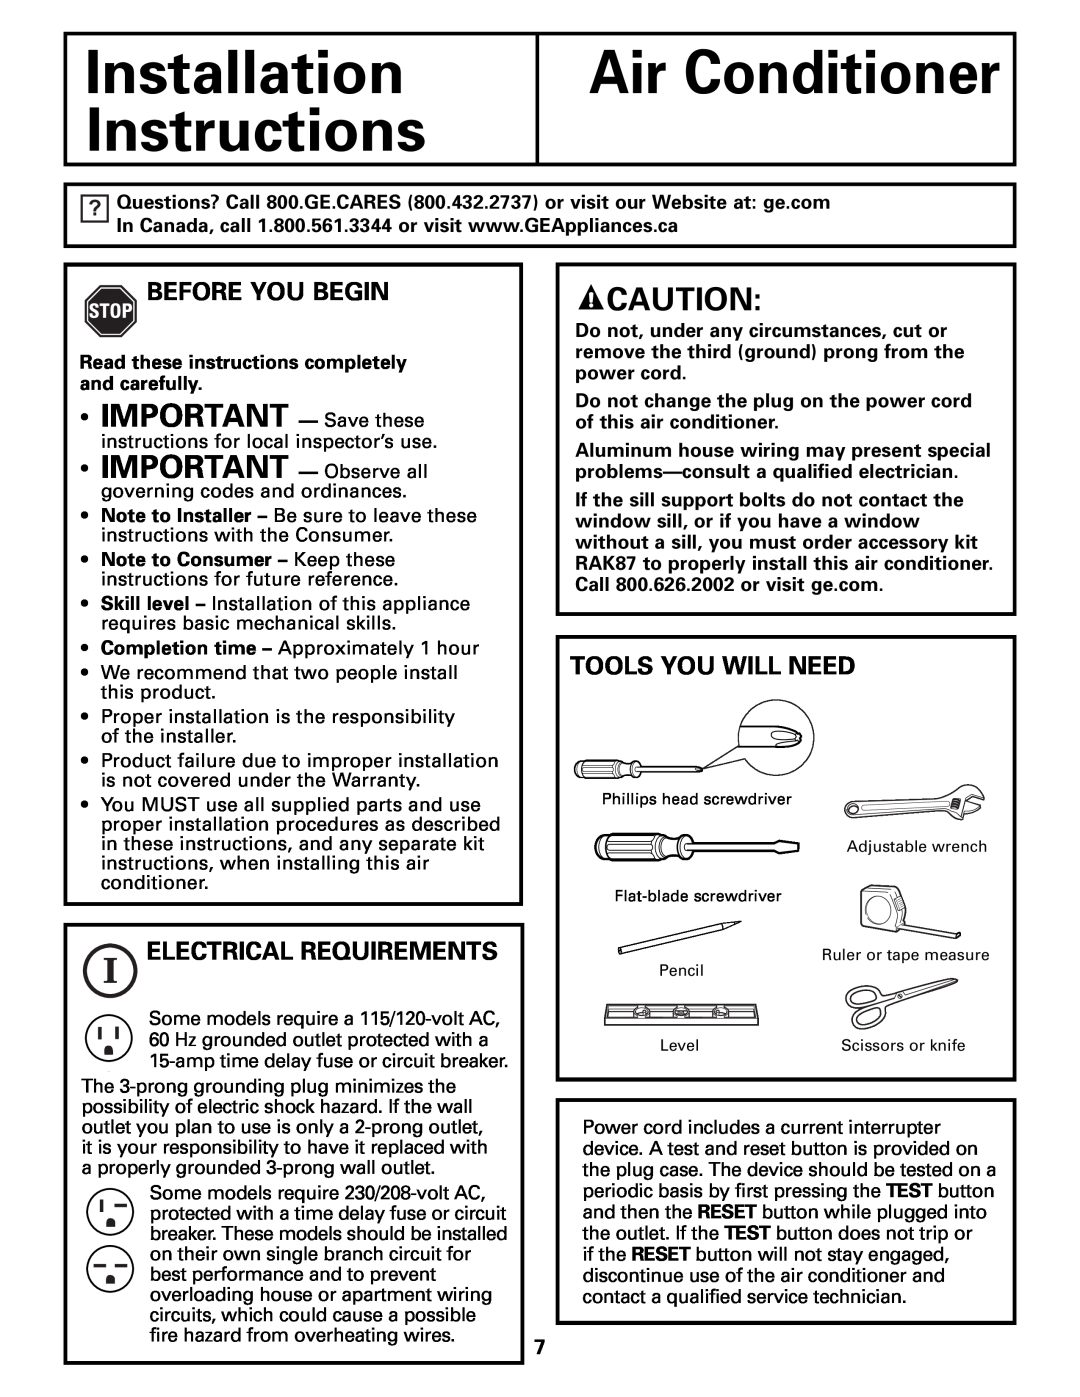 GE AEM10 Installation Instructions, Air Conditioner, IMPORTANT - Save these, Before You Begin, Electrical Requirements 